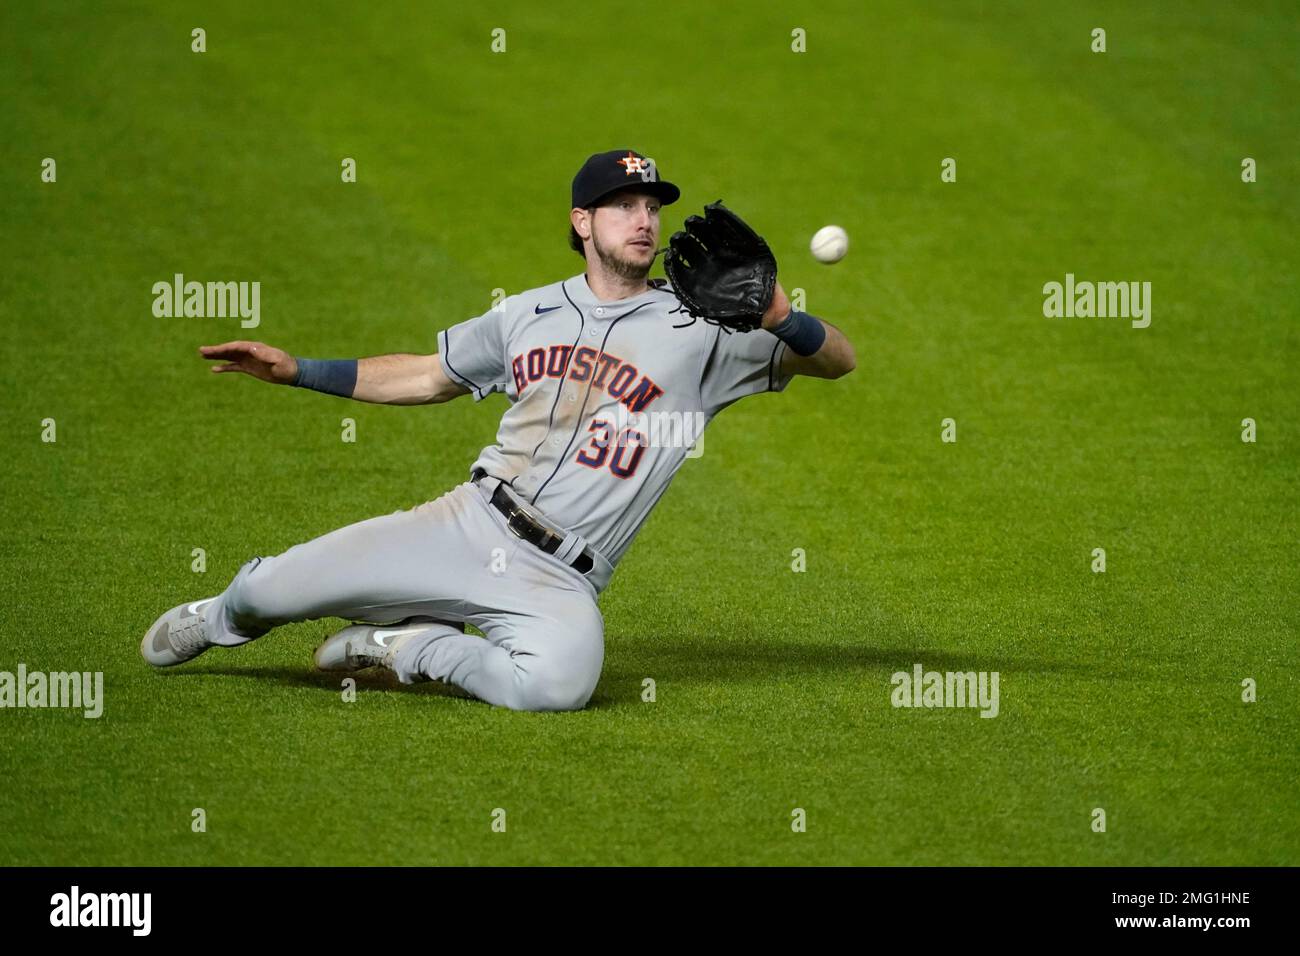 Houston Astros left fielder Kyle Tucker leans out to catch a Texas